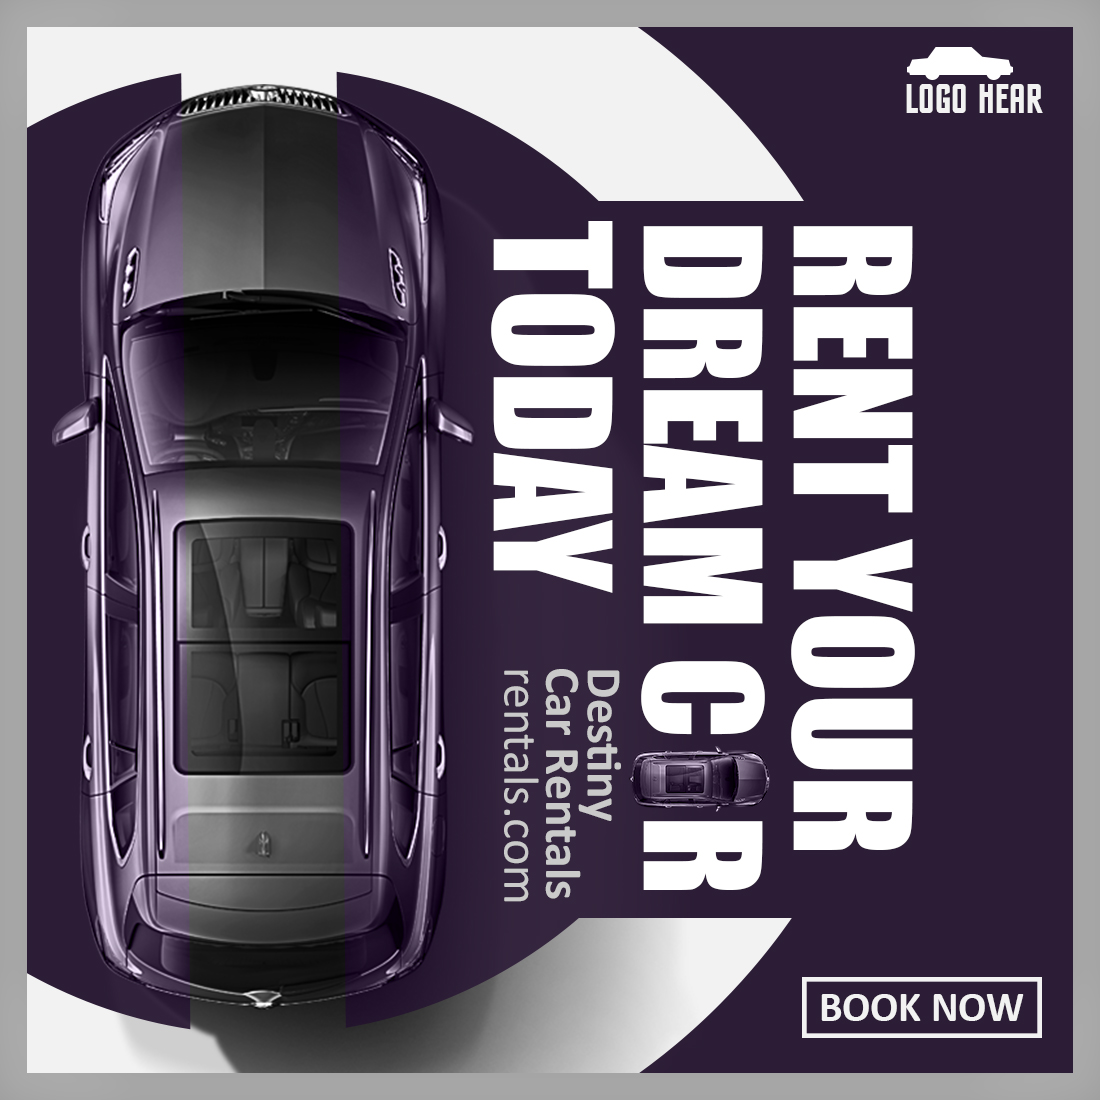 Rent Your Dream car Today preview image.